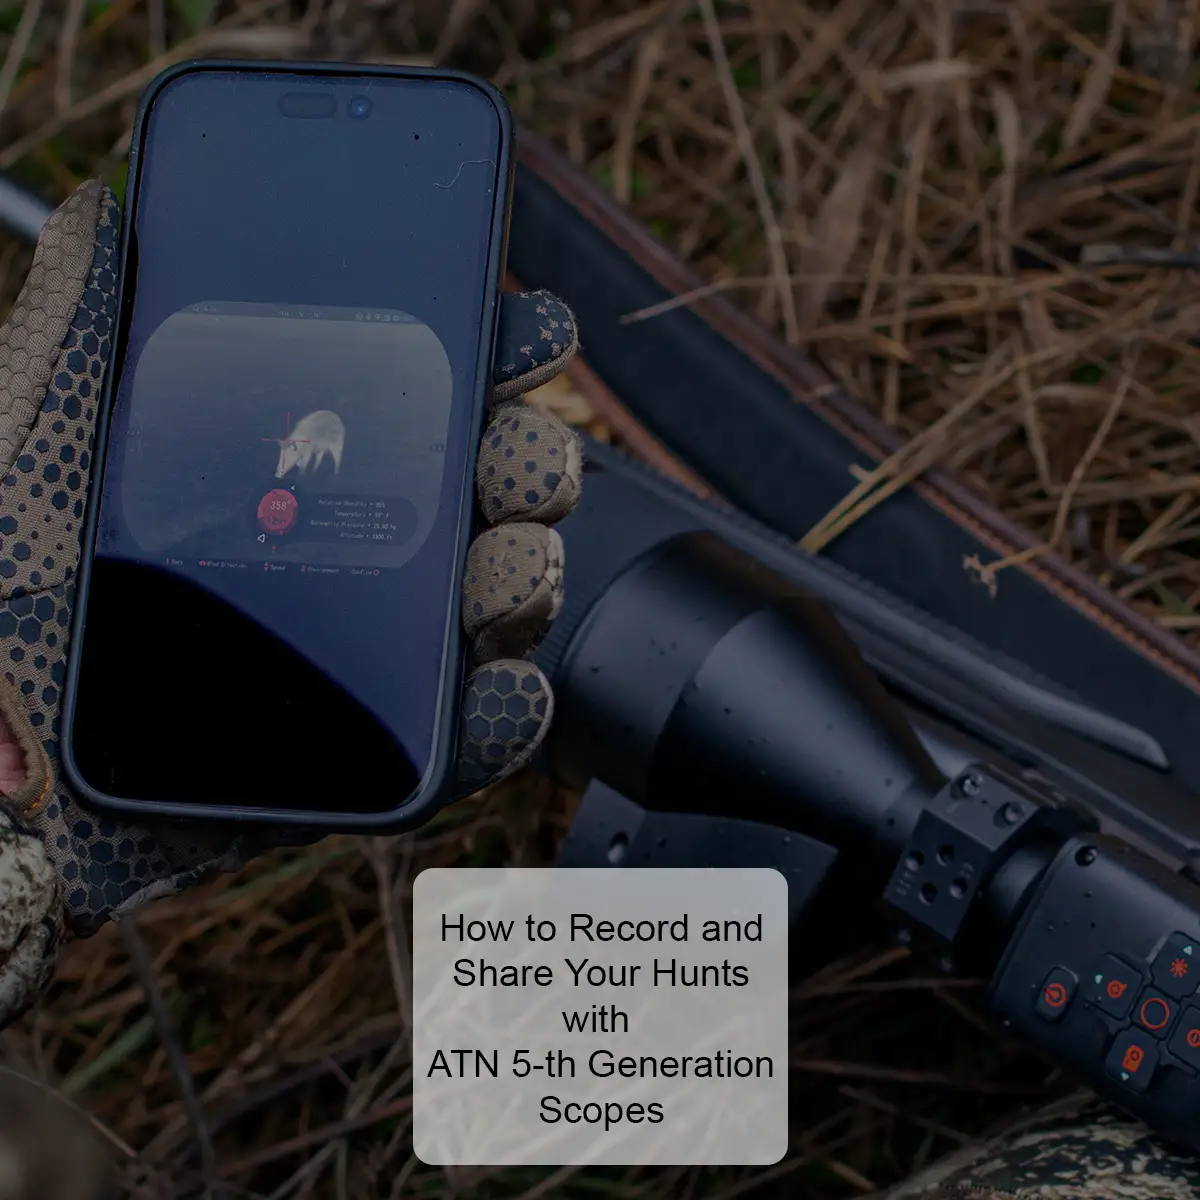 Recording and Sharing Your Hunts with ATN 5th Generation Scopes